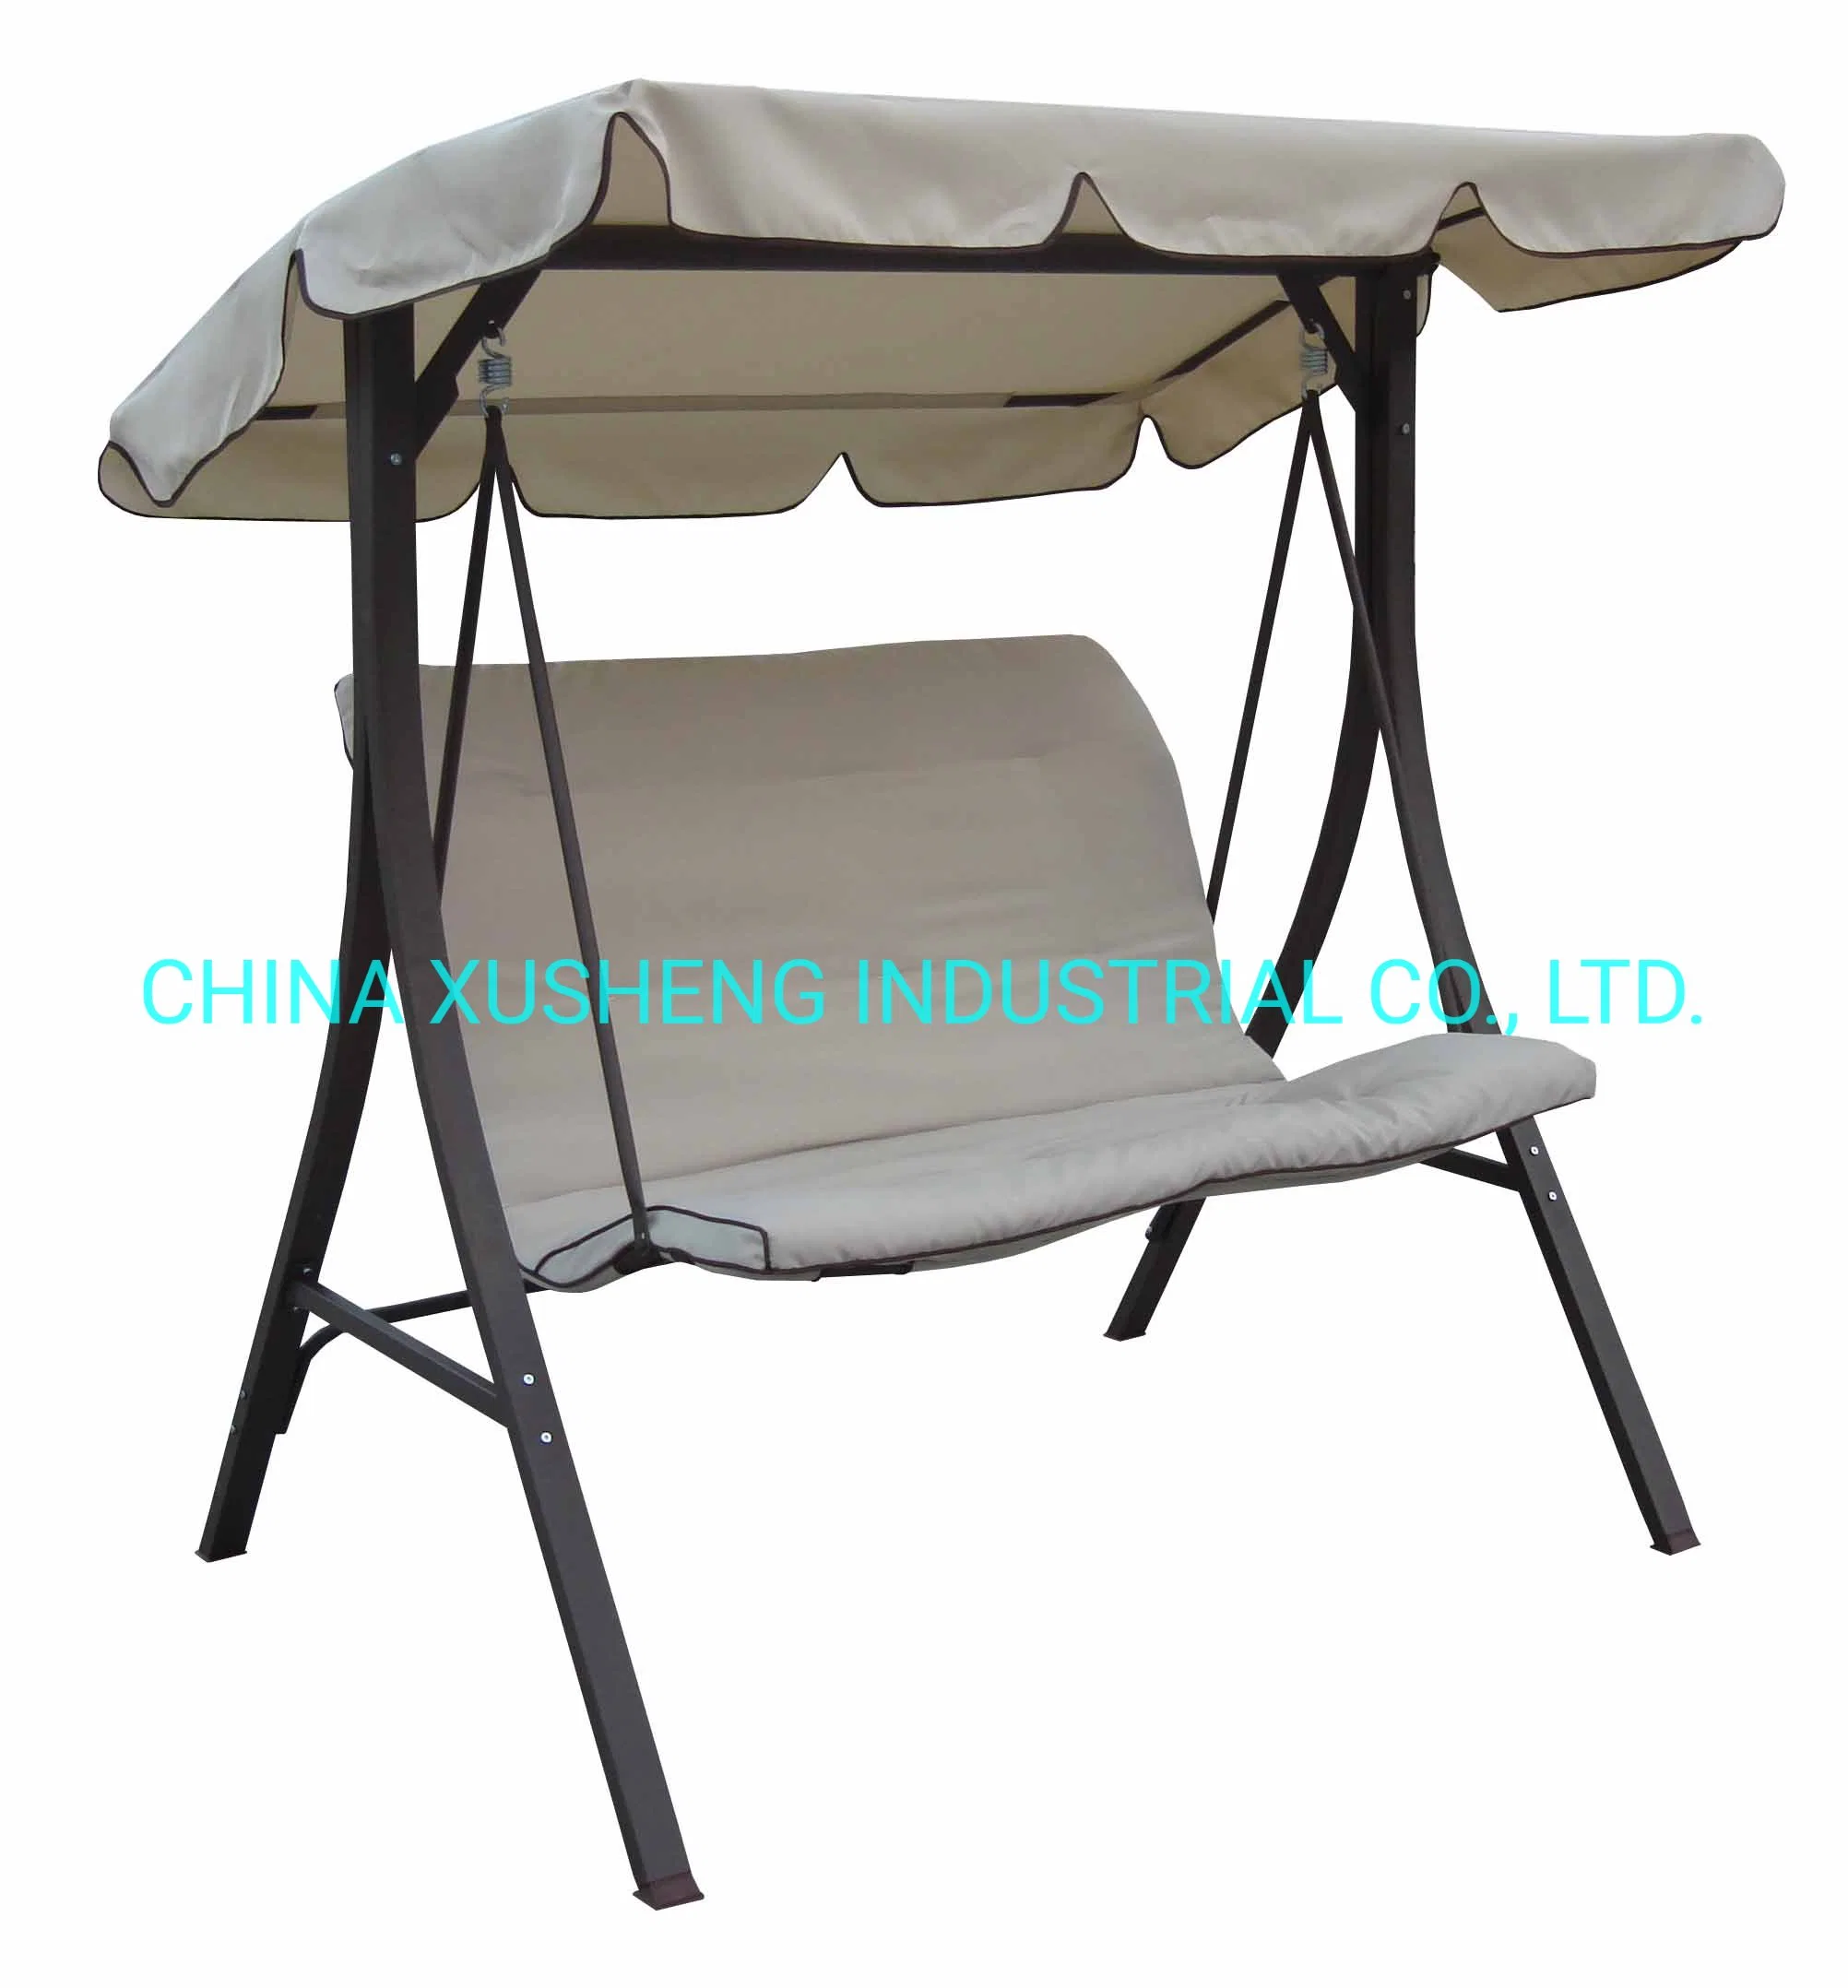 2 Seater Swing Chair Outdoor Furniture Steel Frame